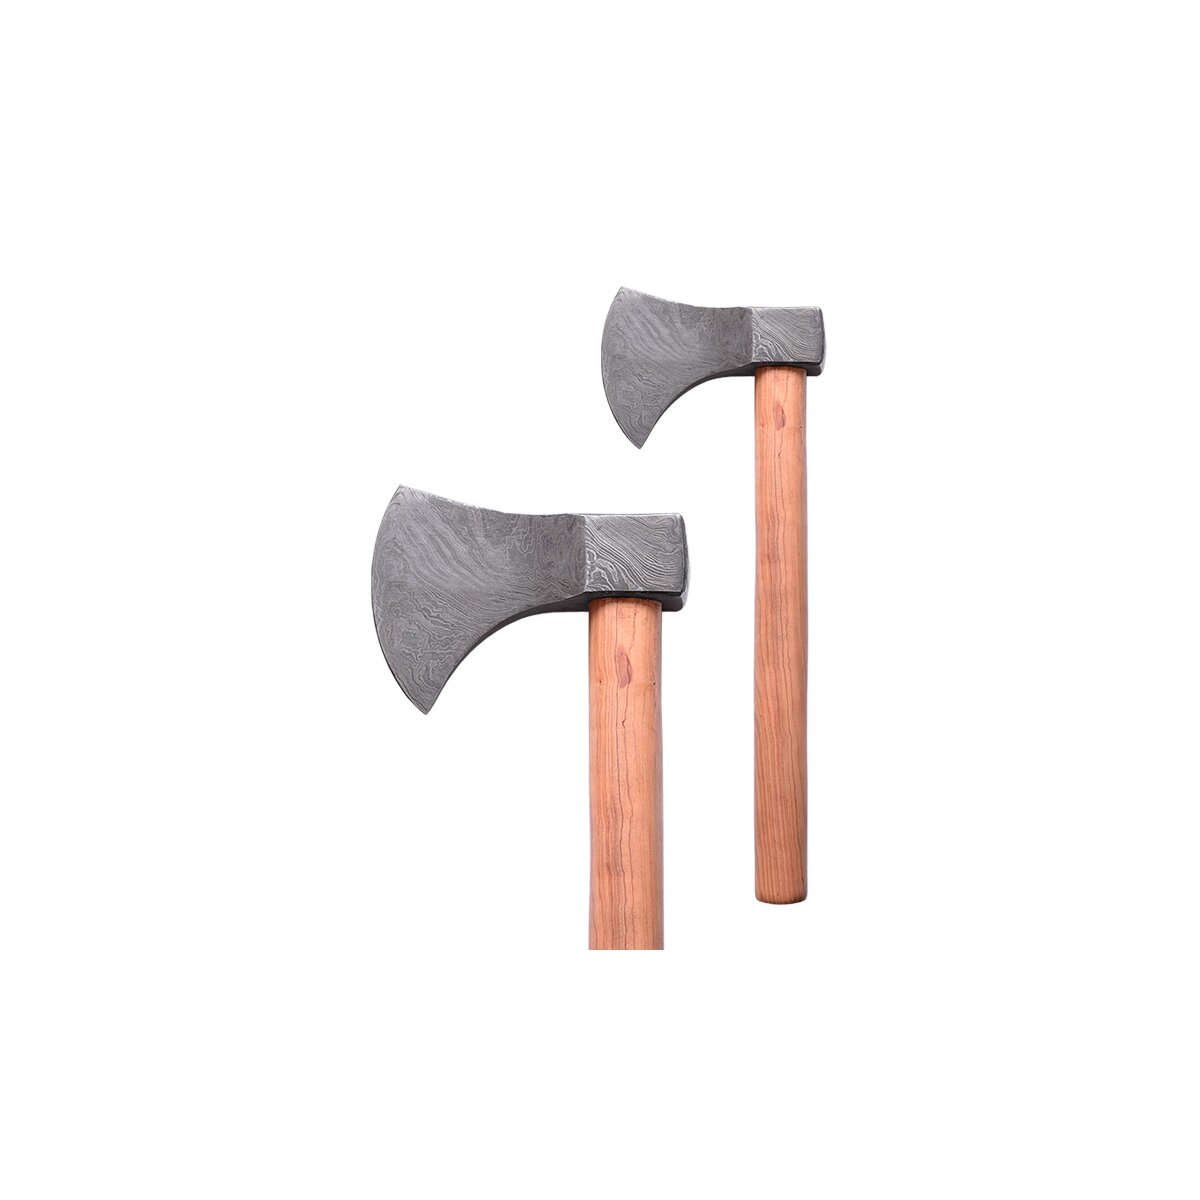 Damascus steel axe with wooden handle